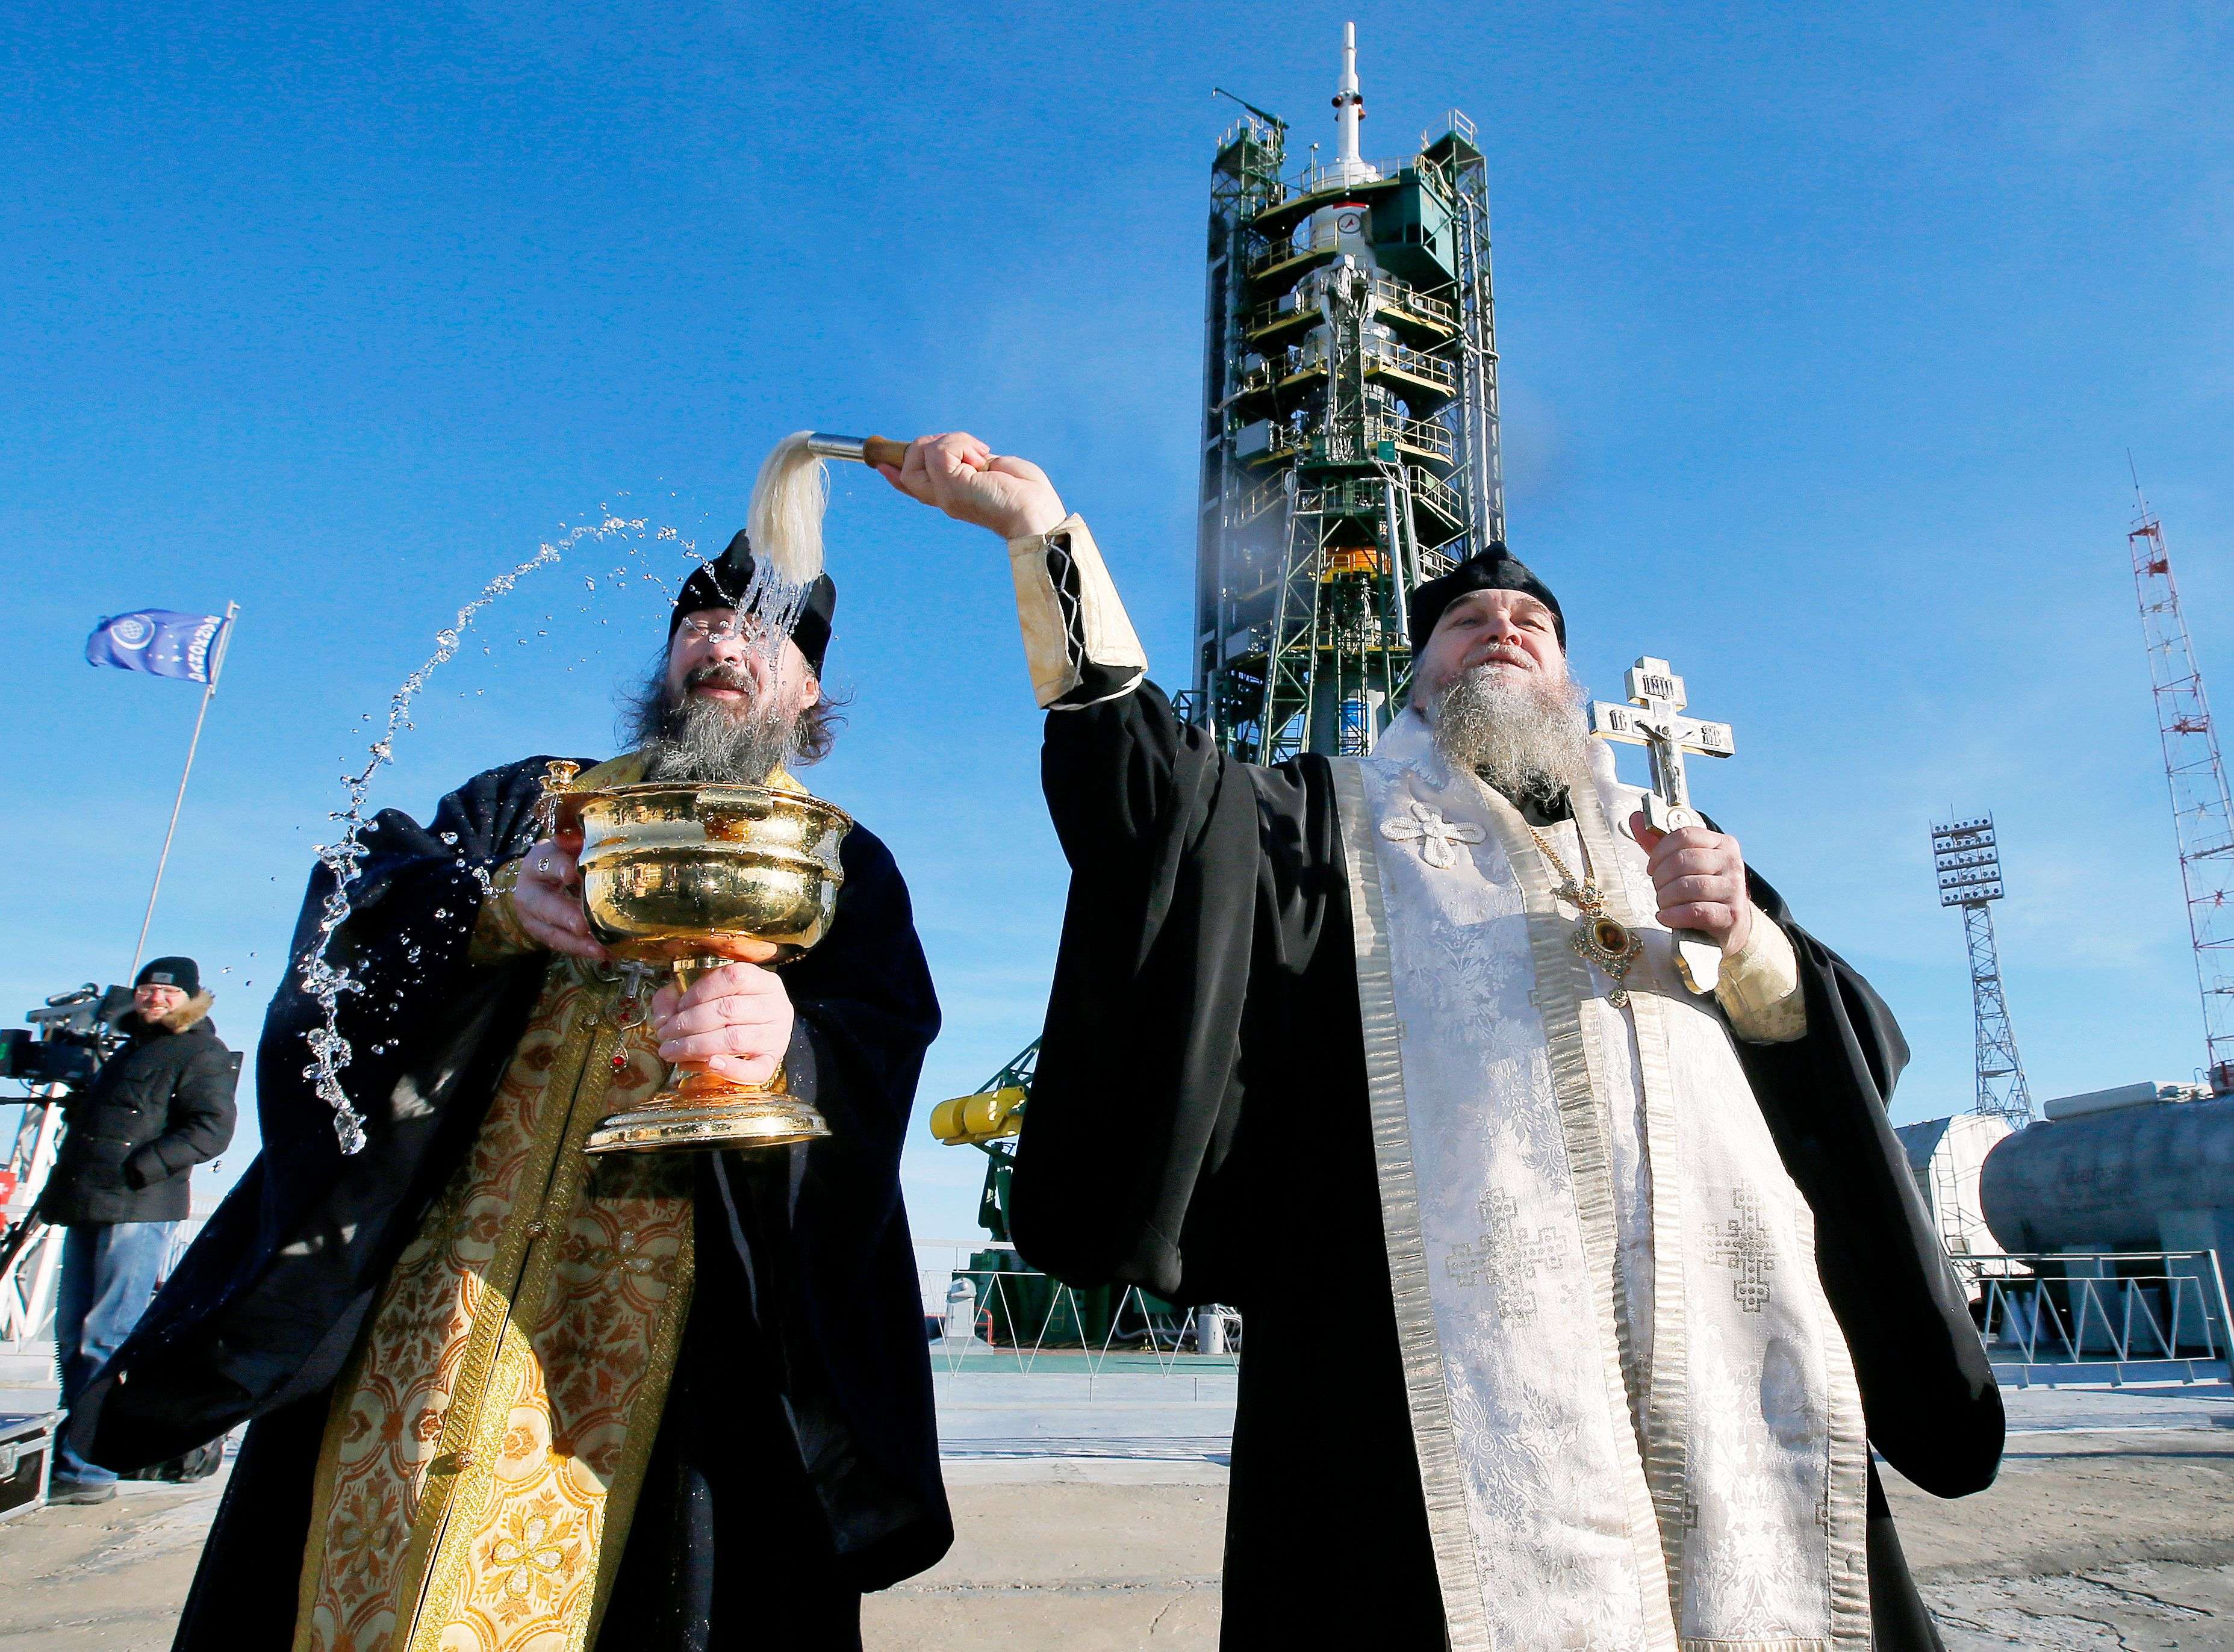 Orthodox priests conduct a blessing service in front of the Soyuz TMA-19M spacecraft at Russian leased Baikonur cosmodrome, Kazakhstan, Monday, Dec. 14, 2015.  The new Soyuz mission is scheduled to start on Tuesday, Dec. 15. The Russian rocket will carry U.S. astronaut Tim Kopra, Russian cosmonaut Yuri Malenchenko and British astronaut Tim Peake. (AP Photo/Dmitry Lovetsky)